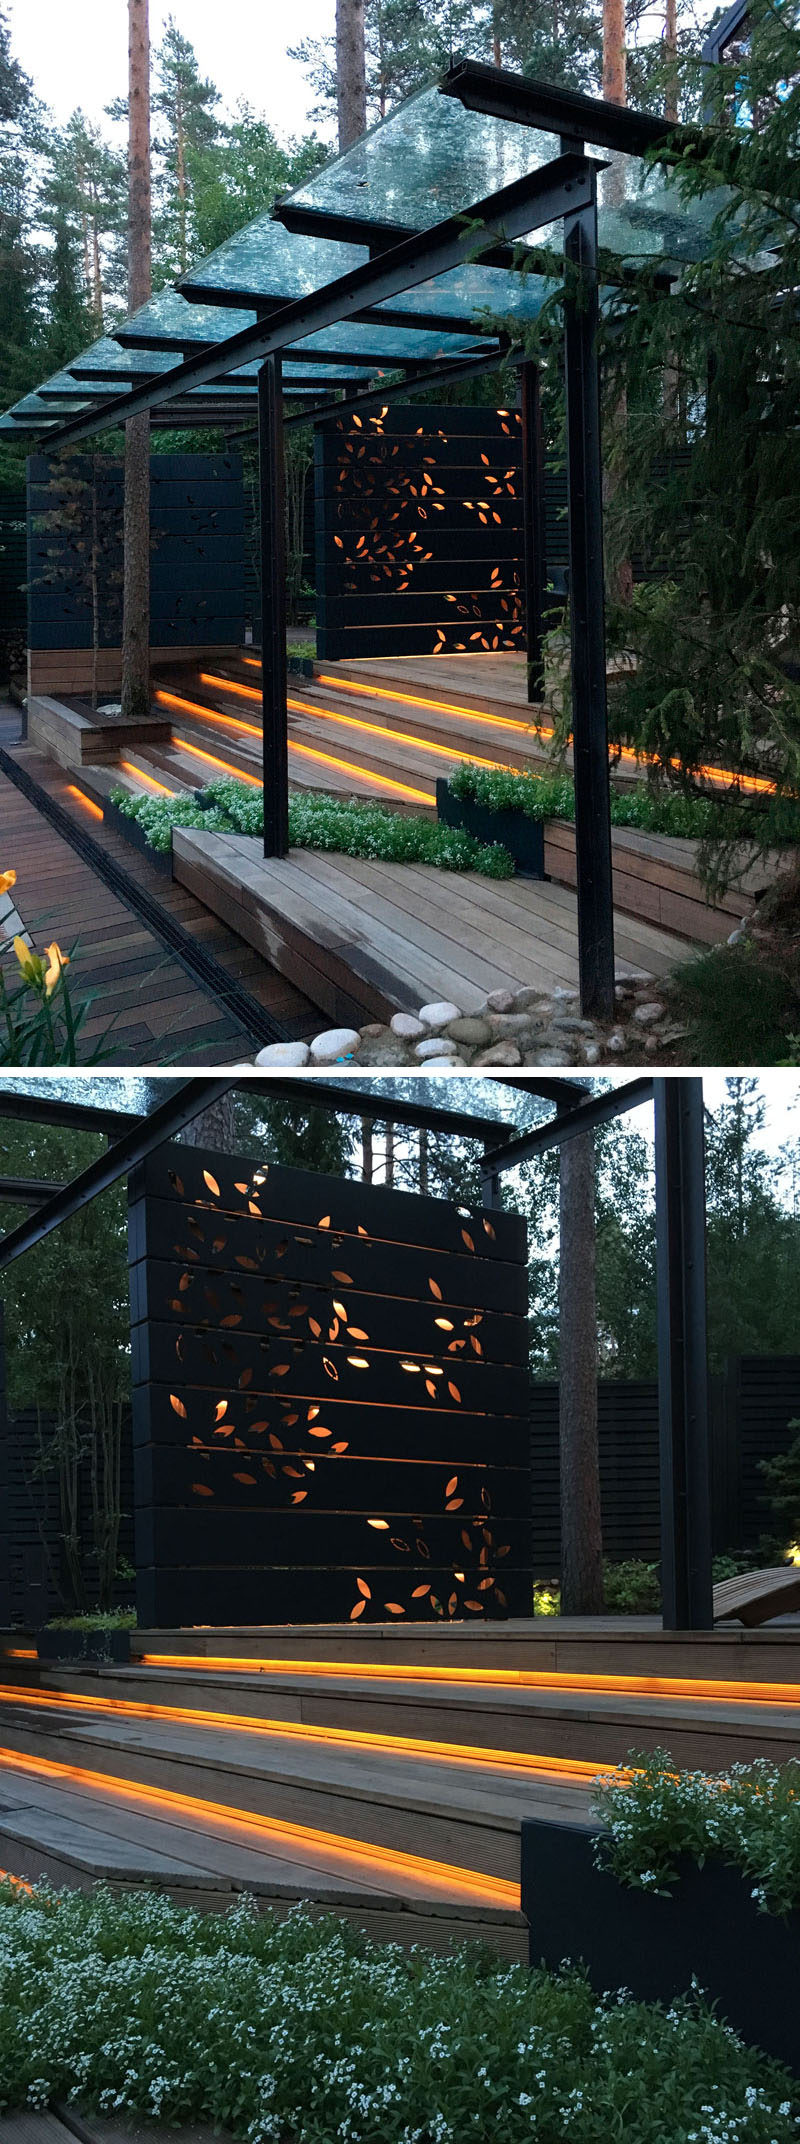 This gym has an landscaped outdoor area with hidden lighting under the steps, built-in planters, and a decorative screen that has an artistic leaf pattern that lights up.